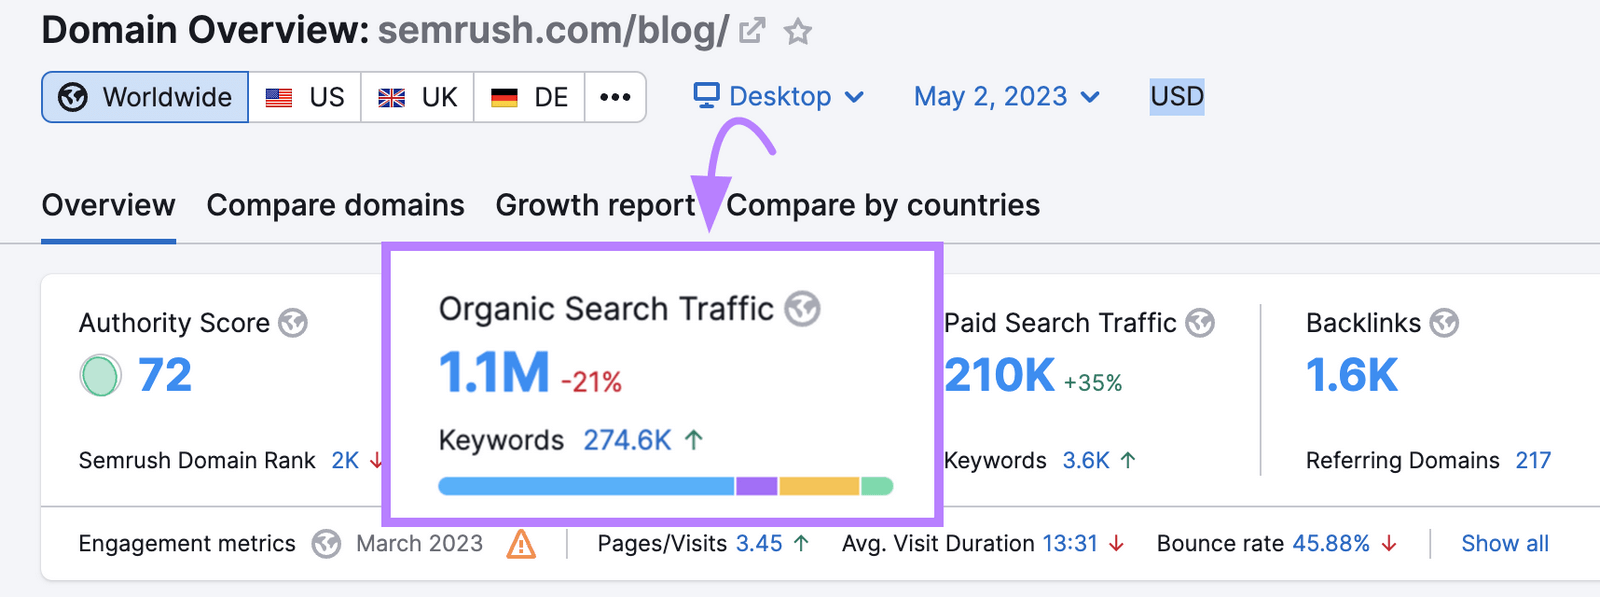 "Organic Search Traffic" metric showing 1.1.M for "semrush.com/blog/" in Domain Overview tool